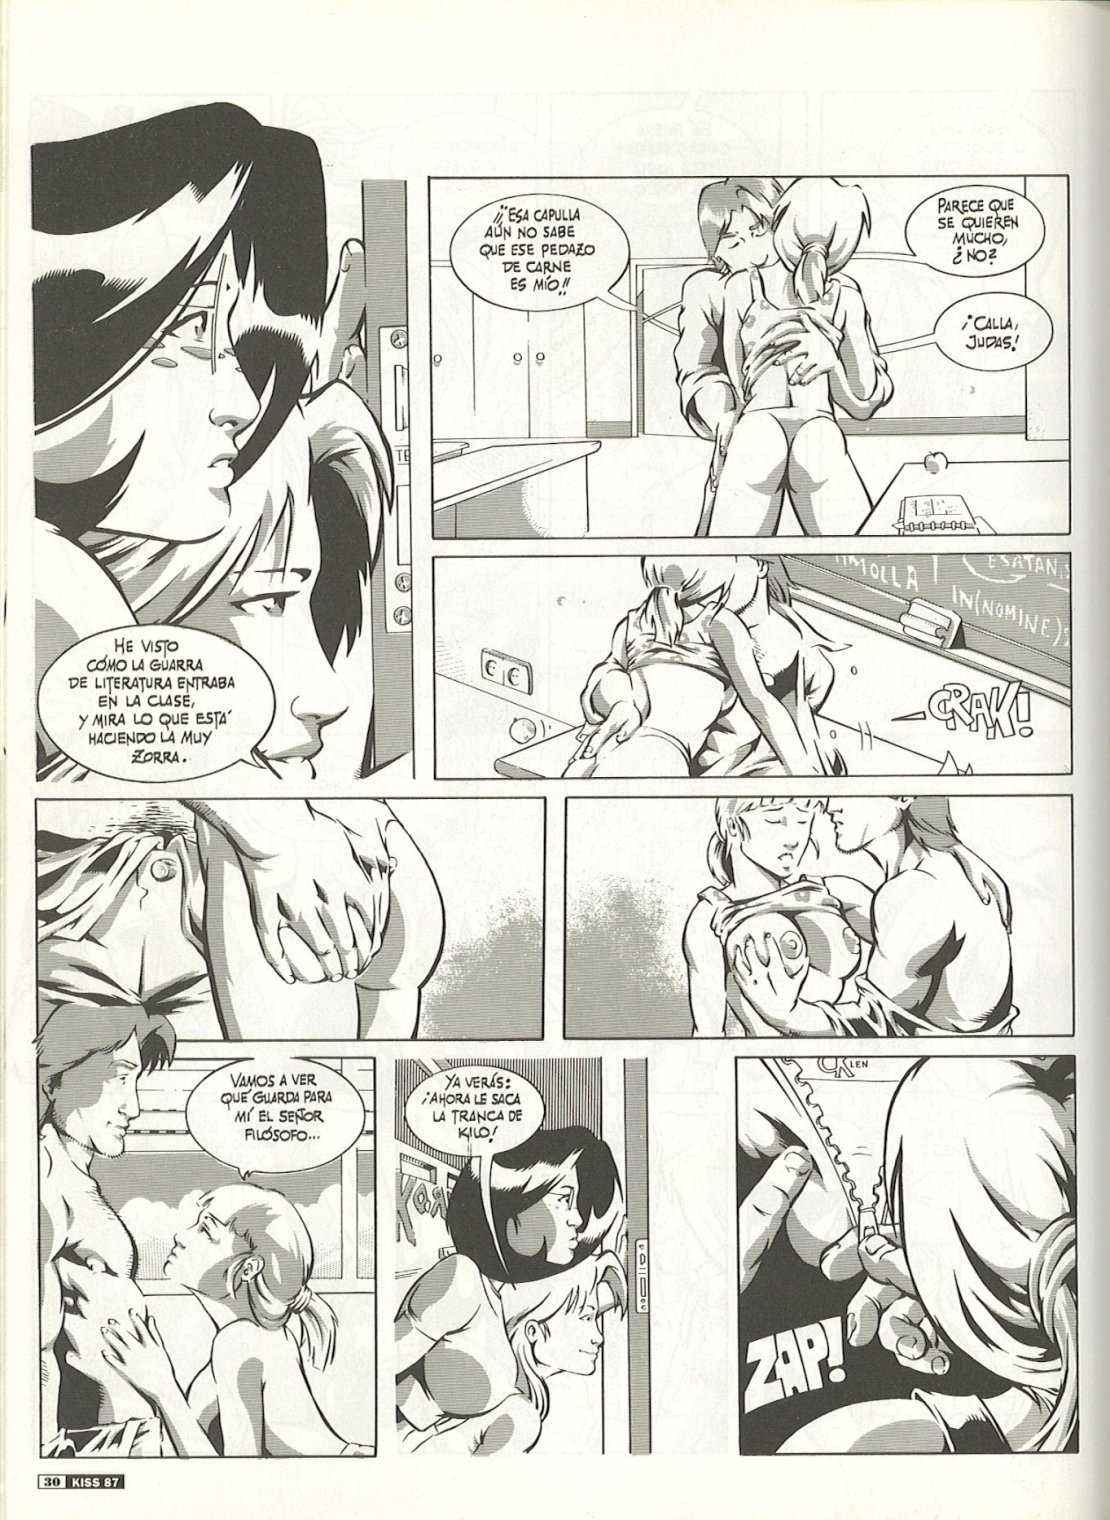 Kiss Comix 087 image number 29